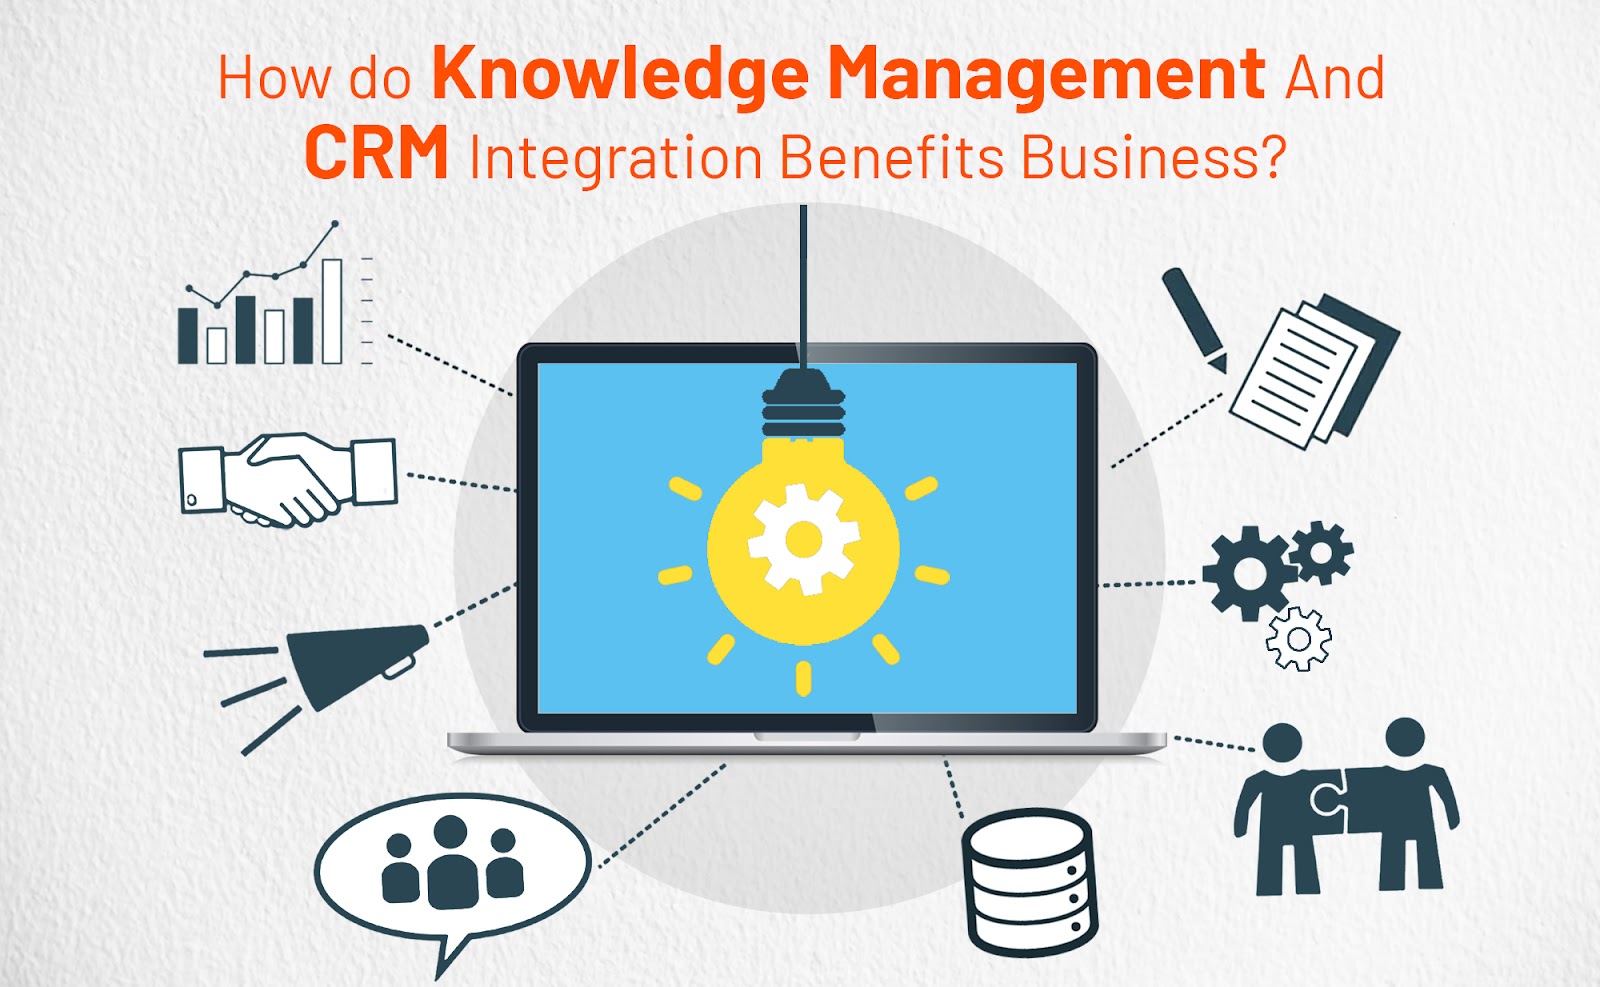 Knowledge Management and CRM integration